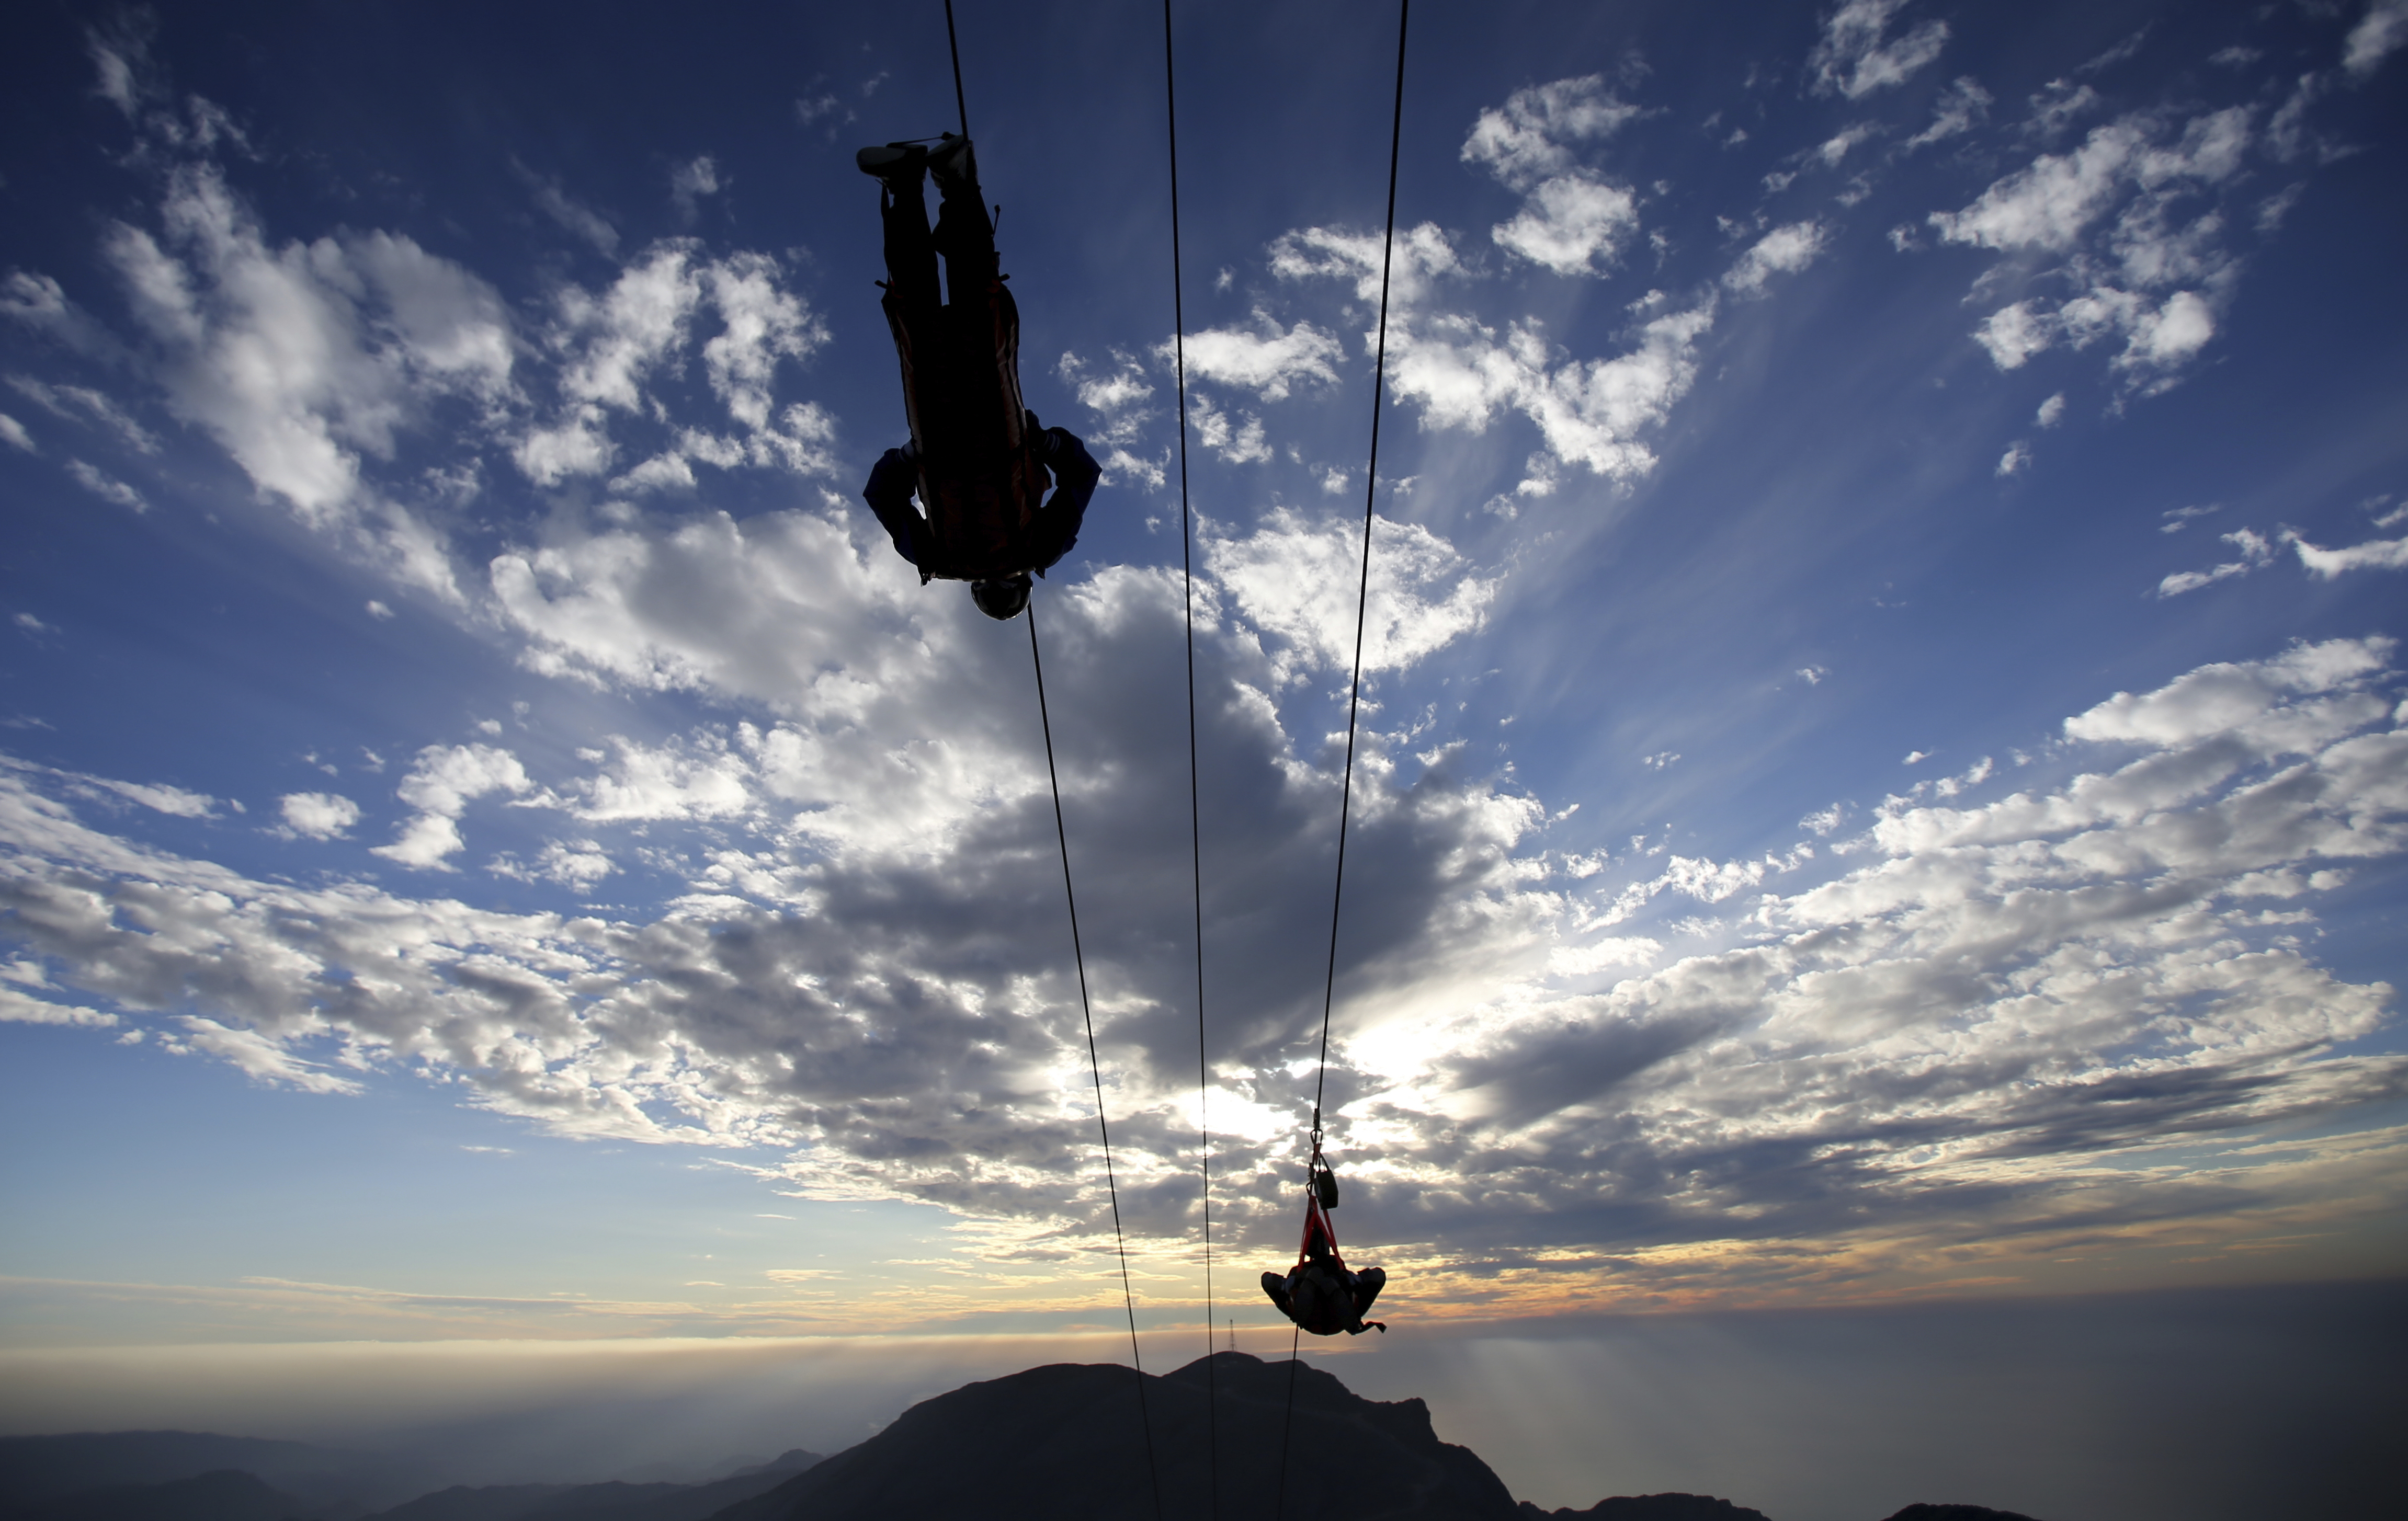 In this Wednesday, Jan. 31, 2018 photo, thrill-seekers descind the UAE's highest mountain as they try out a new zip line, on the peak of Jebel Jais mountain, 25 kms (15.5 miles) north east of Ras al-Khaimah, United Arab Emirates. The UAE is claiming a new world record with the opening of the world's longest zip line, measuring 2.83 kilometers (1.76 miles) in length. Guinness World Records officials certified the zip line on Thursday, the same day the attraction opened to the public. (AP Photo/Kamran Jebreili)